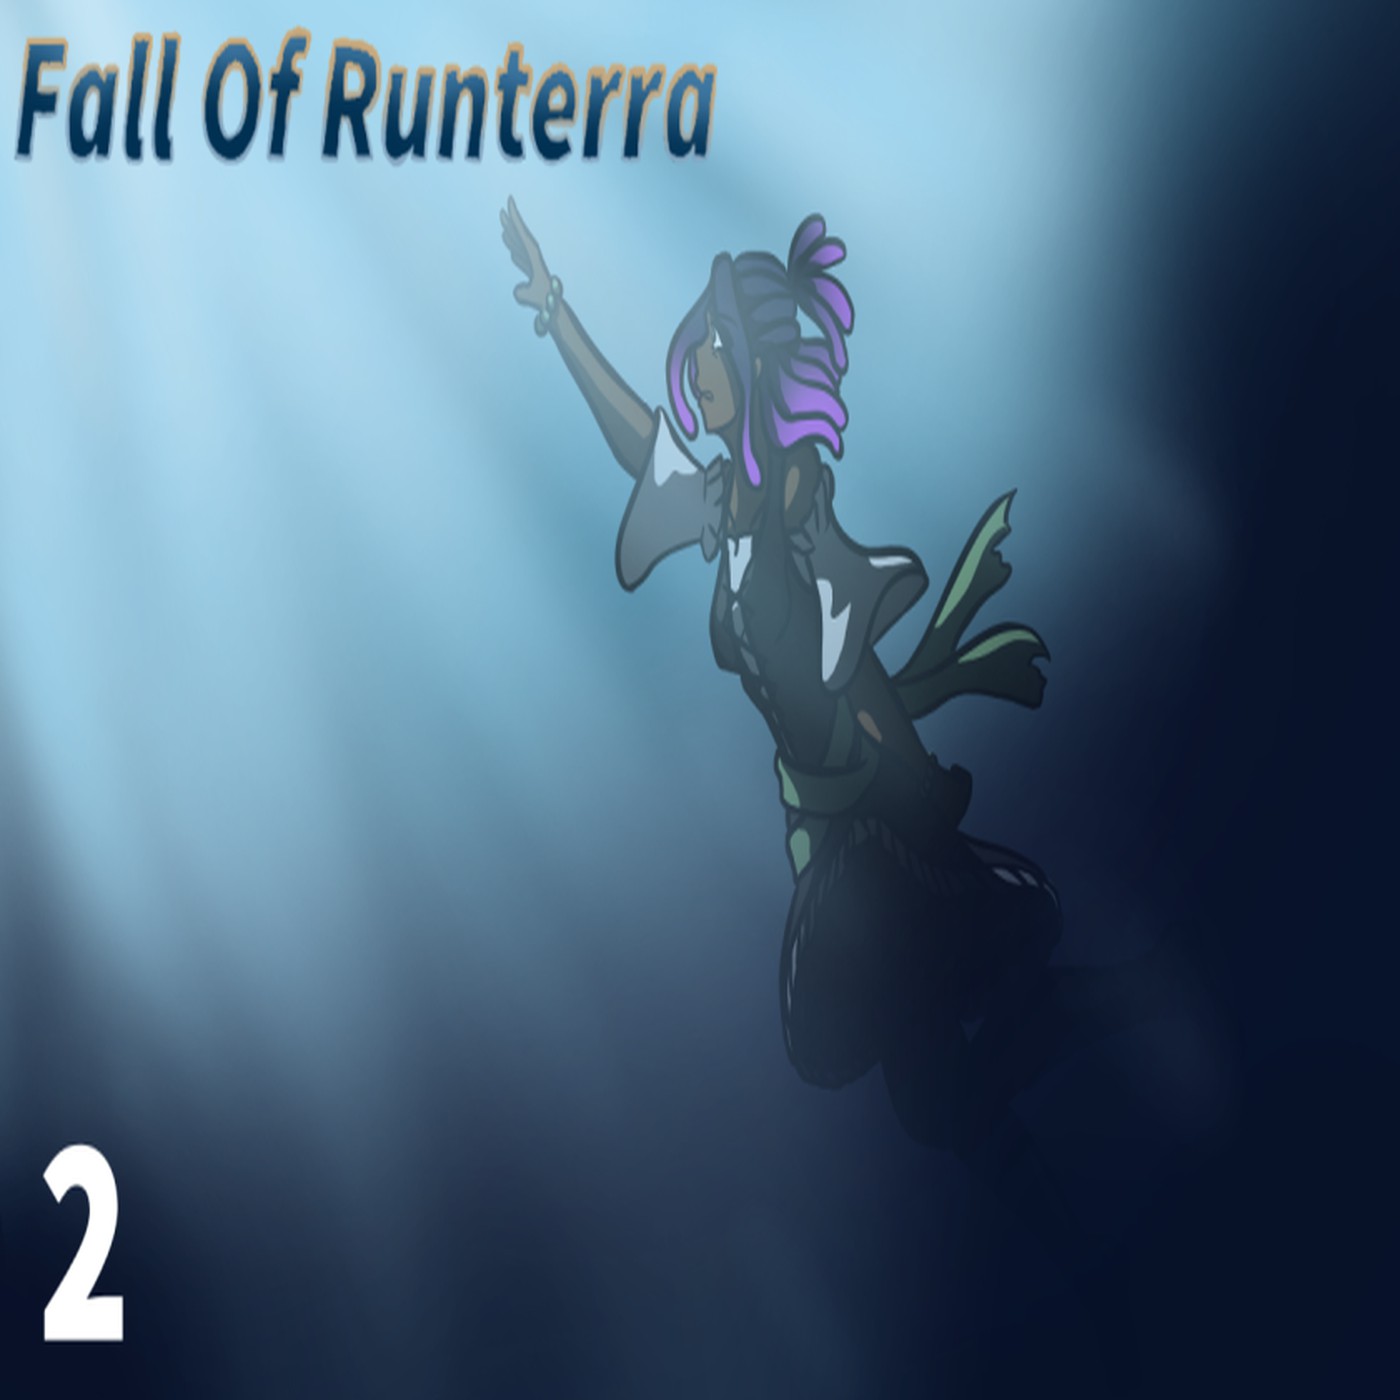 The Fall Of Runeterra a D&D Campaign